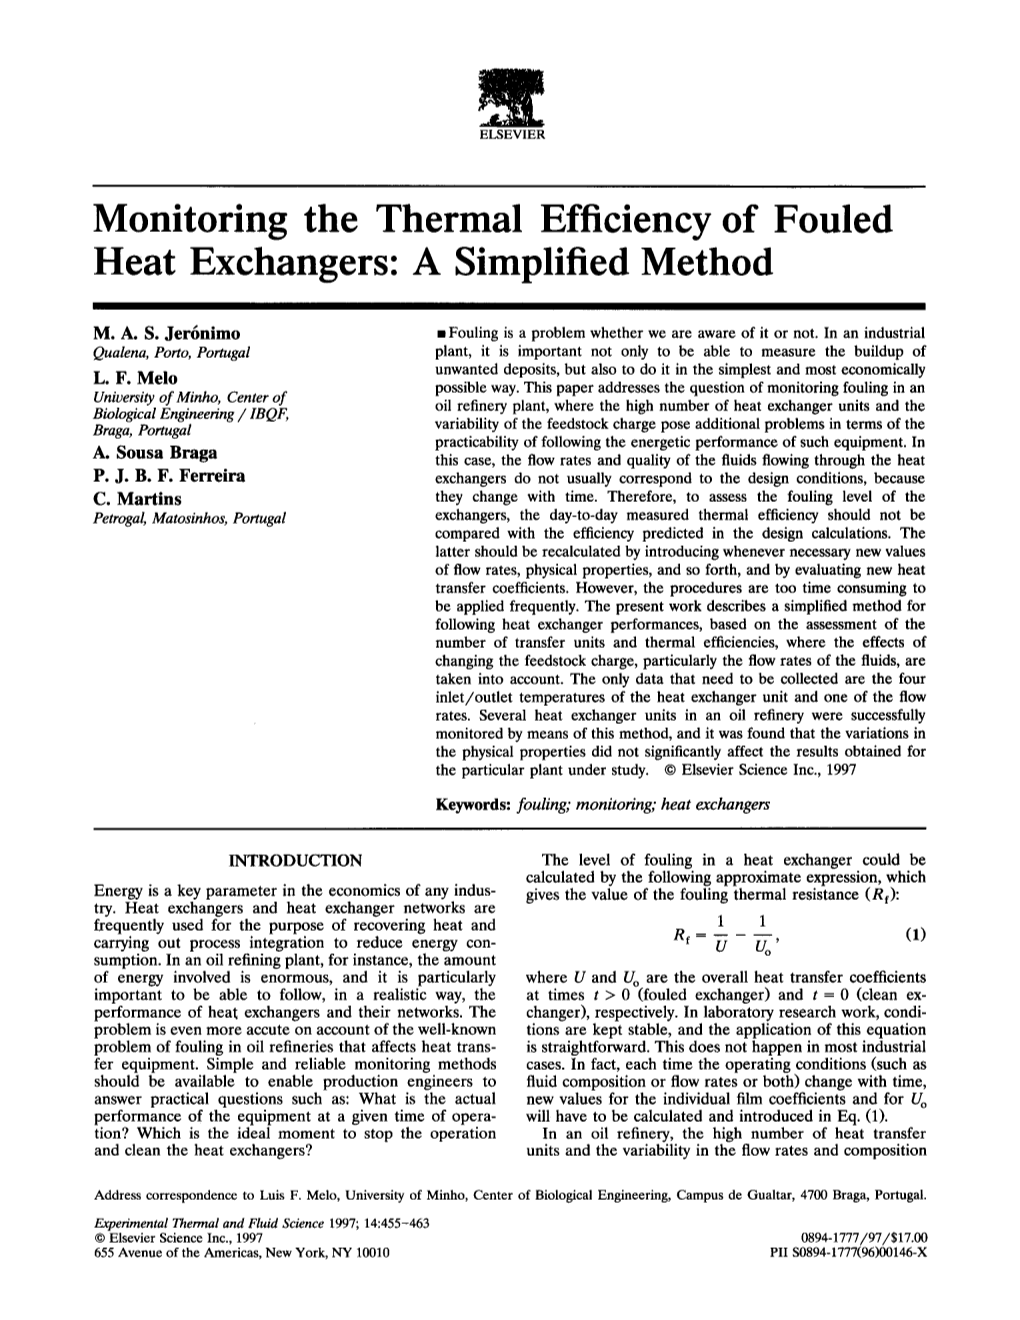 Monitoring the Thermal Efficiency of Fouled Heat Exchangers: a Simplified Method